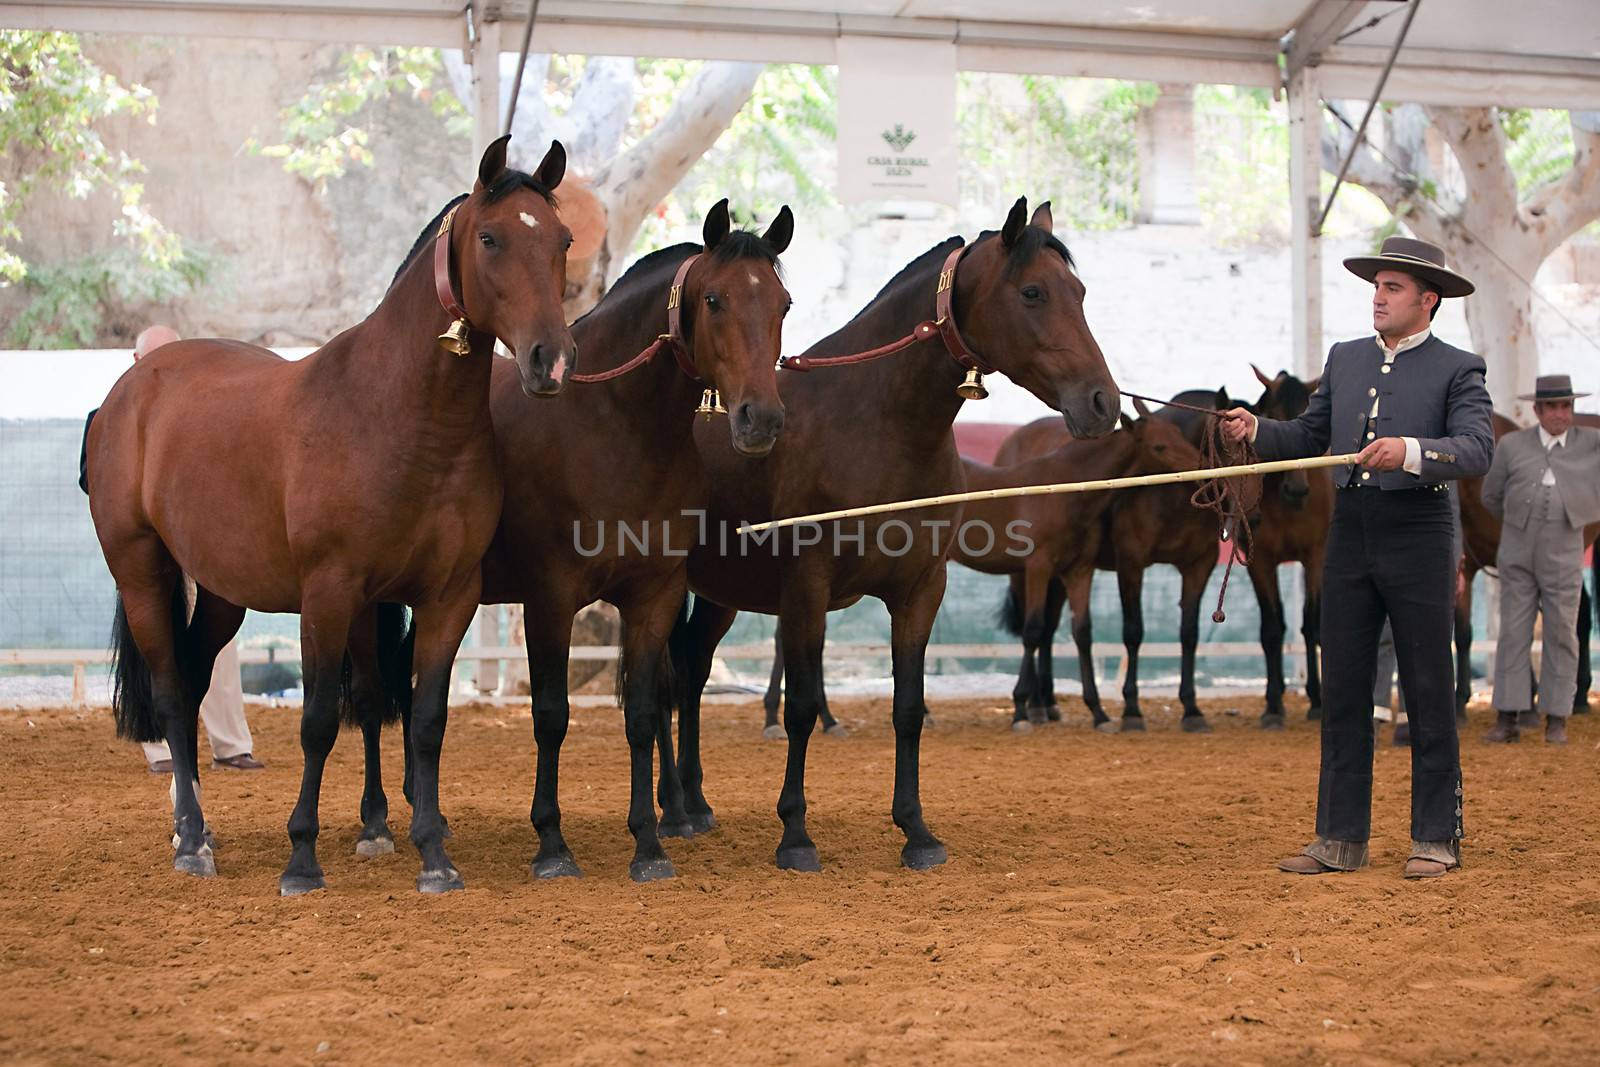 Equestrian test functionality with 3 pure Spanish horses, also called cobras 3 Mares, Spain